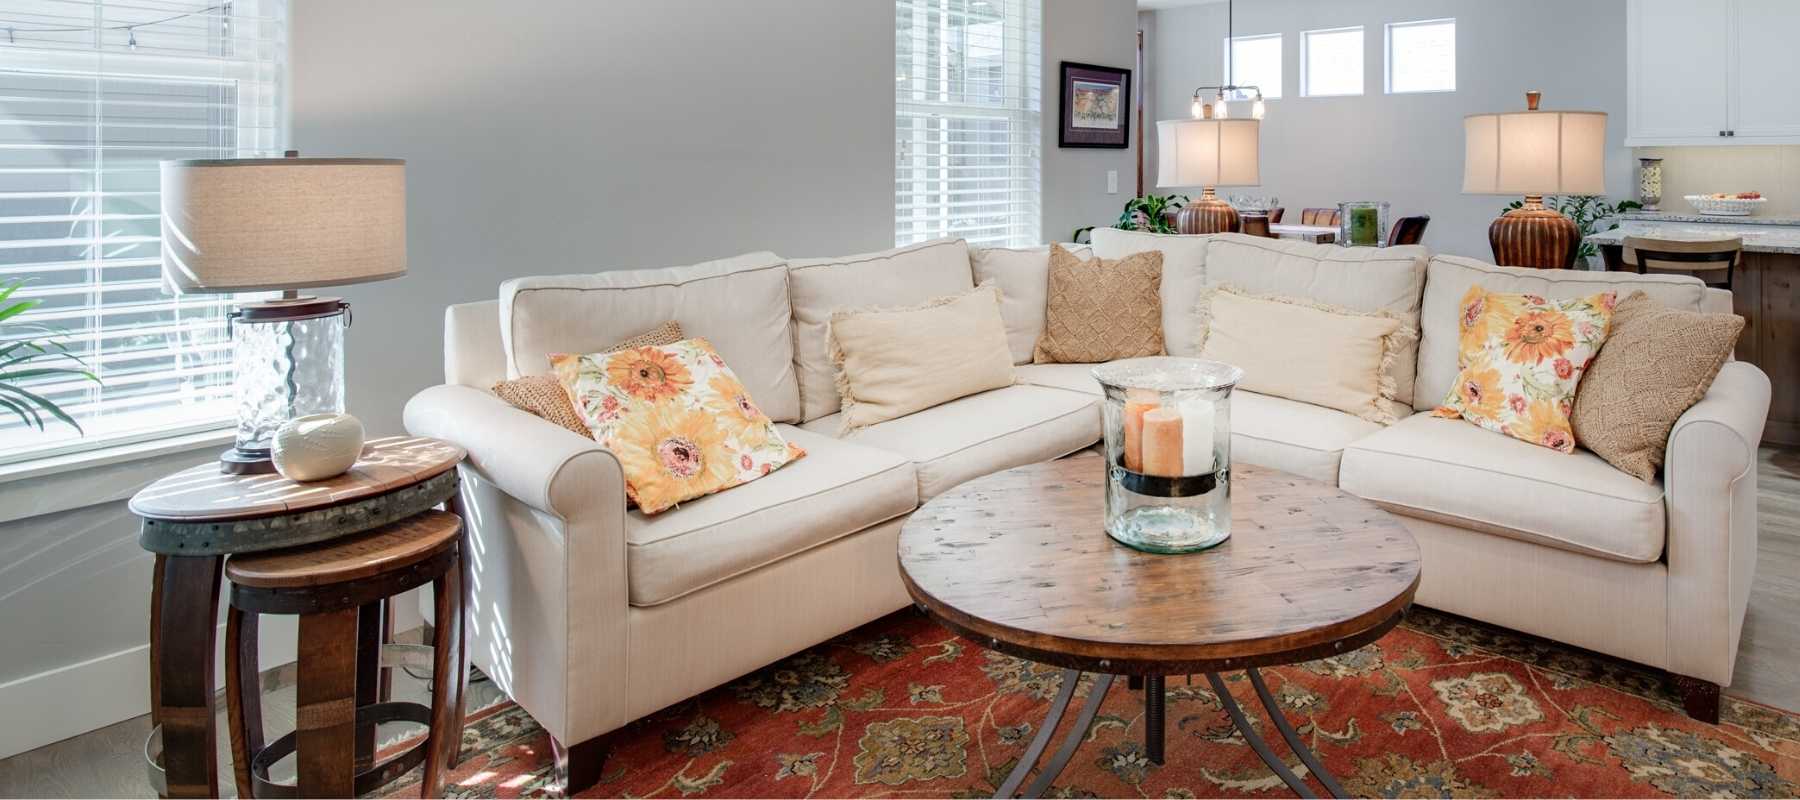 Living room with cream corner sofa and three table lamps